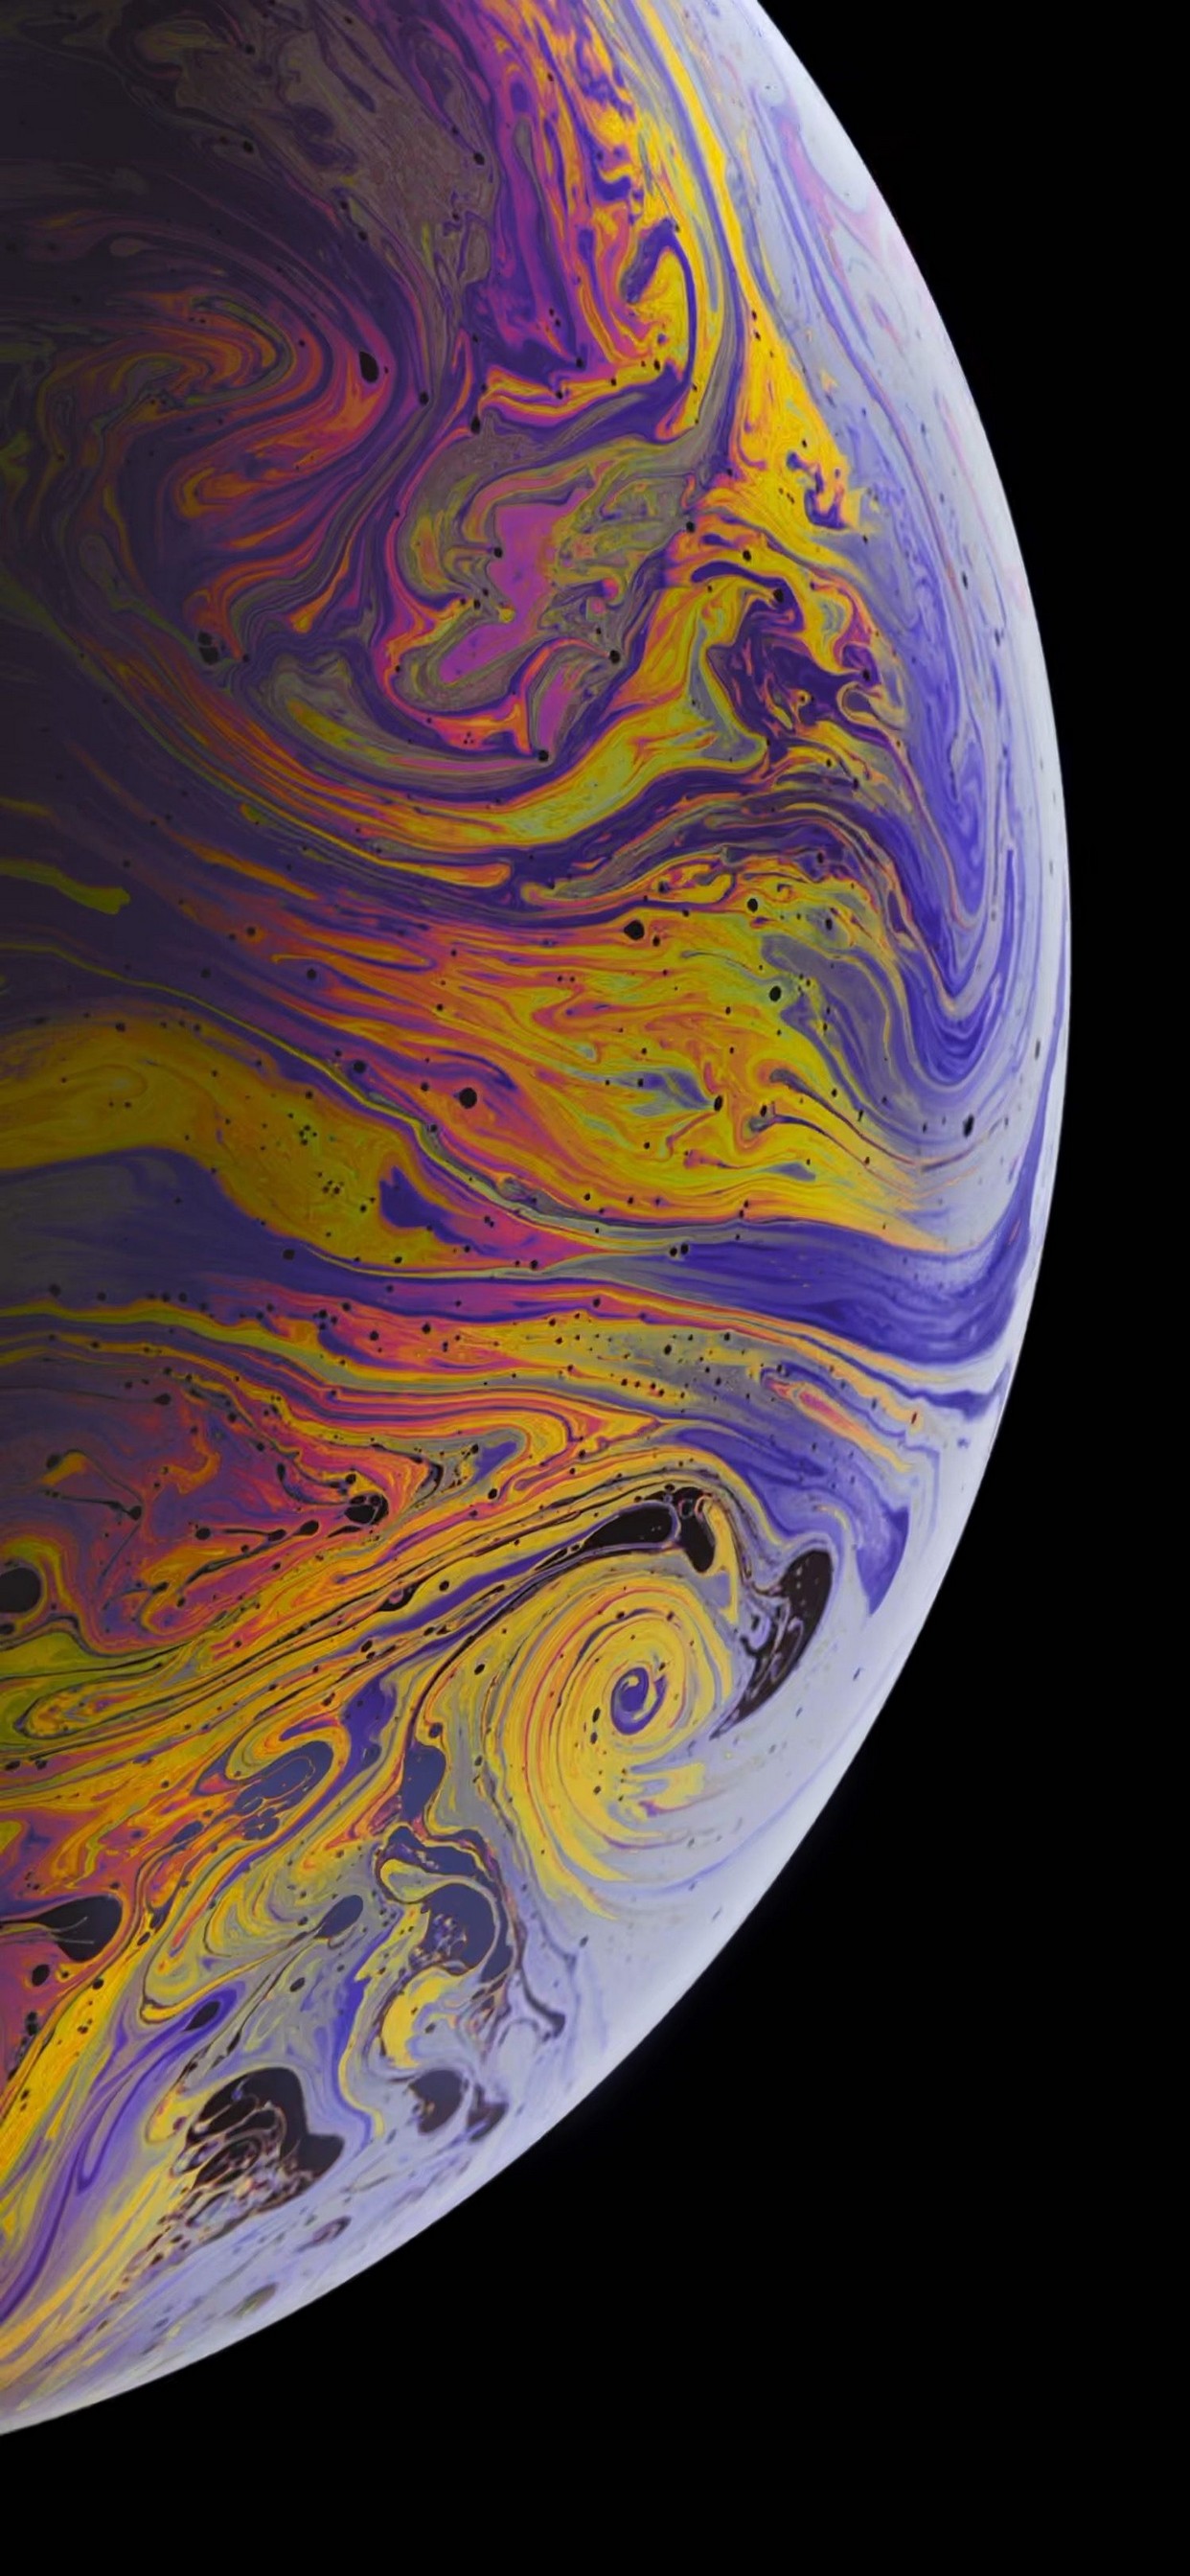 Iphone Xs Max Wallpaper In Hd With High-resolution - Iphone Xs Max -  1242x2688 Wallpaper 